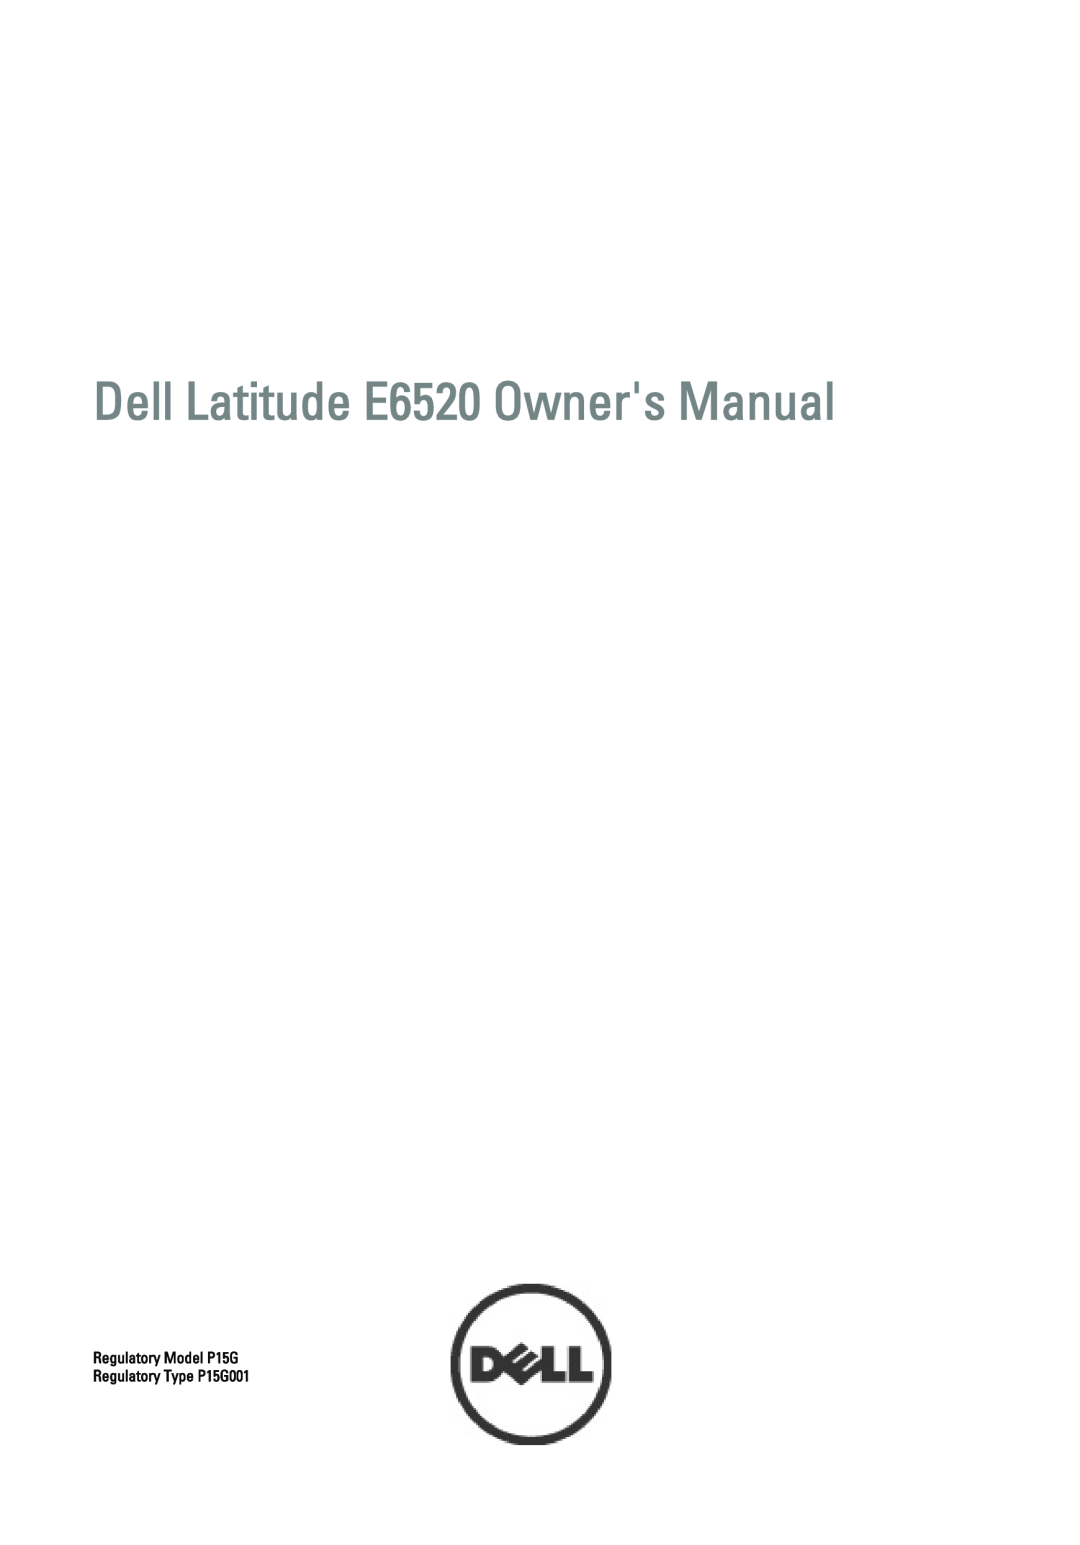 Dell manual Latitude E6420 Front And Back View, Dell Latitude E6420/E6520, Setup and Features Information 